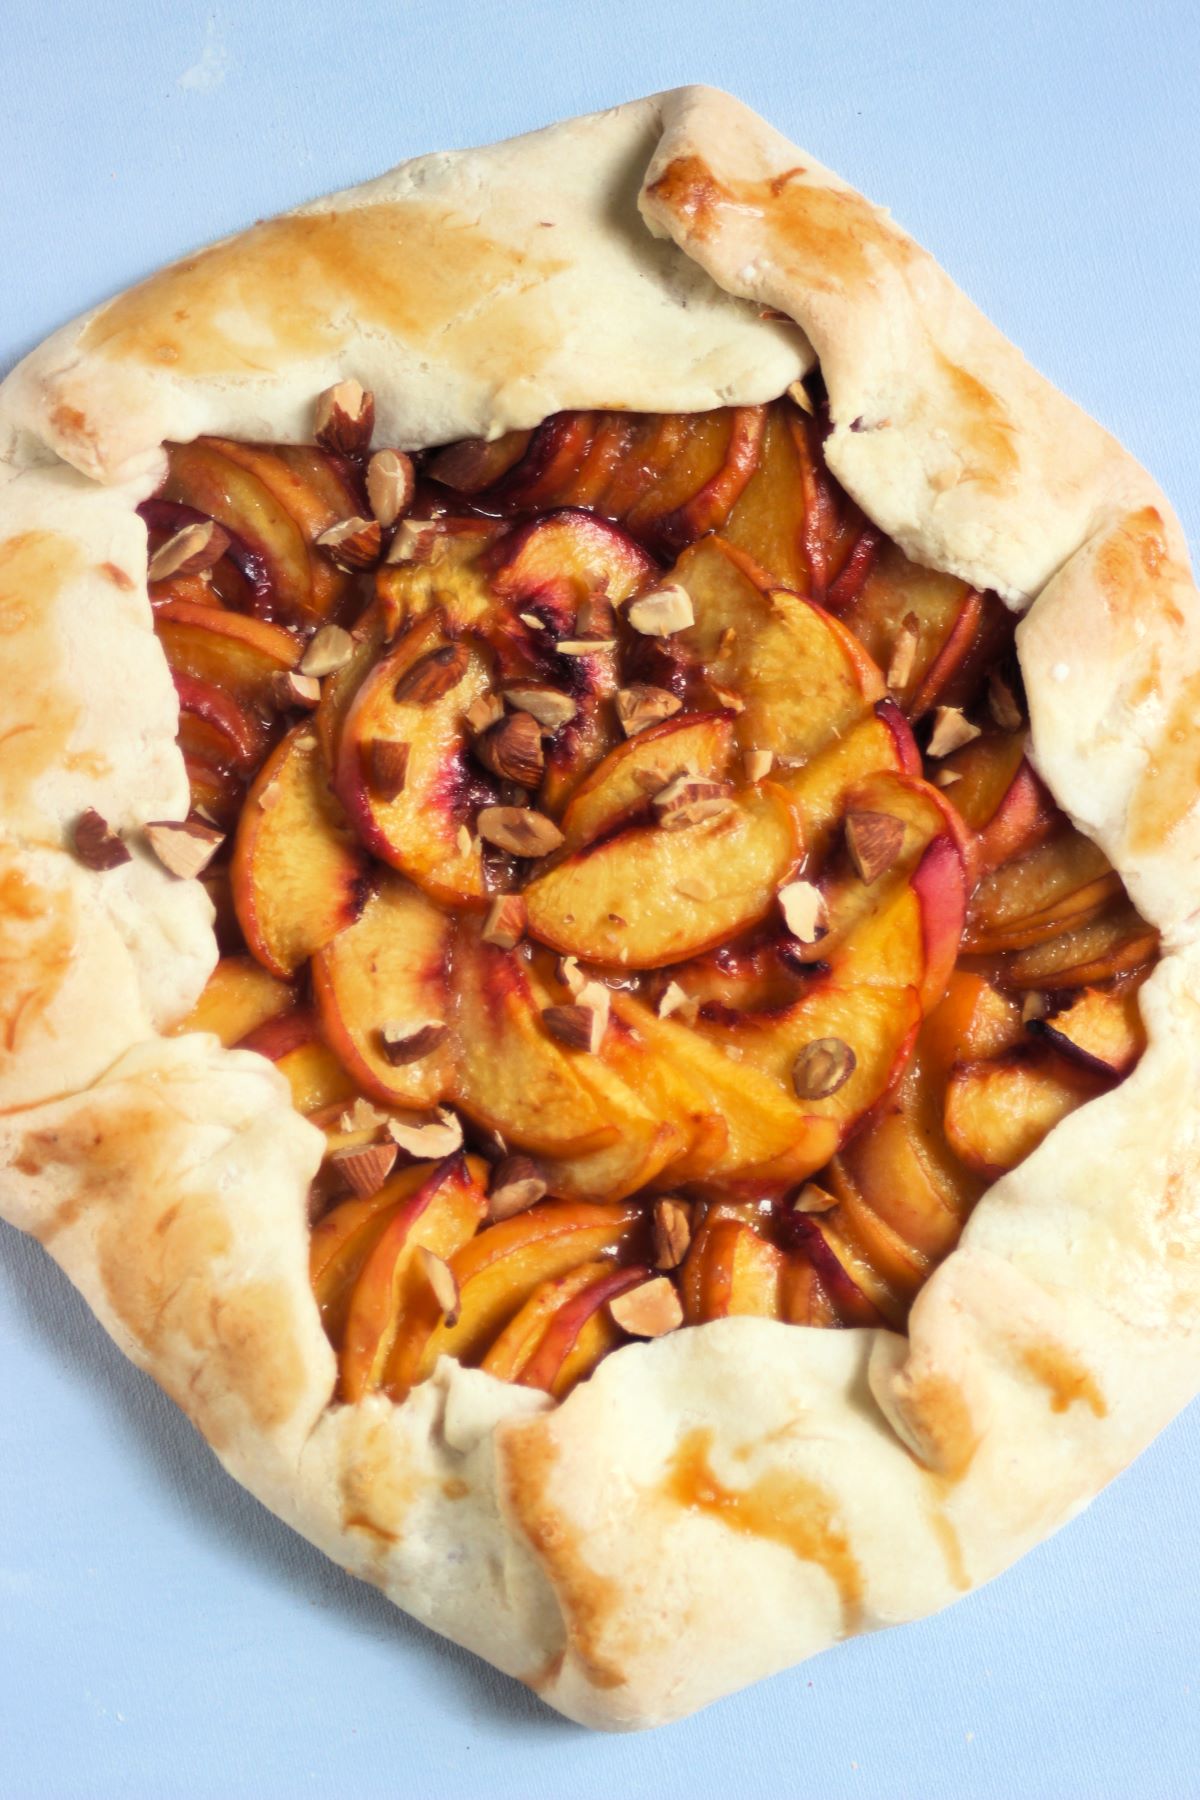 Peach galette on a light blue surface seen from above.